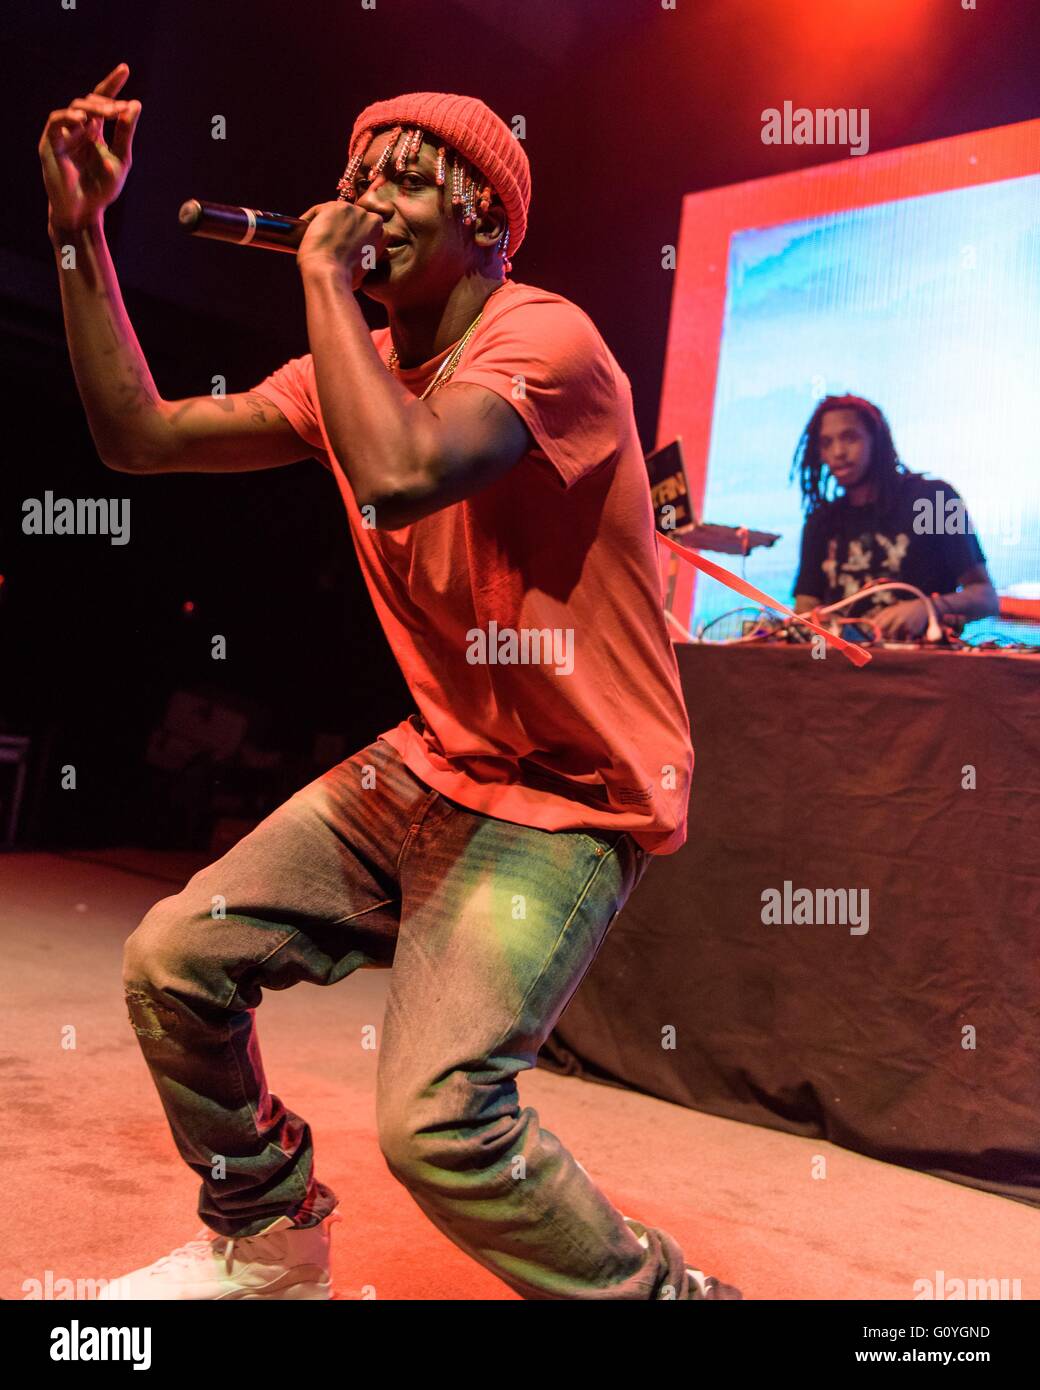 Washington, D.C, USA. 3rd May, 2016. LIL YACHTY performs at the 9:30 Club.  An up-and-coming rapper from Georgia, Lil Yachty has also served as a model  for Kanye West's Yeezy Season 3